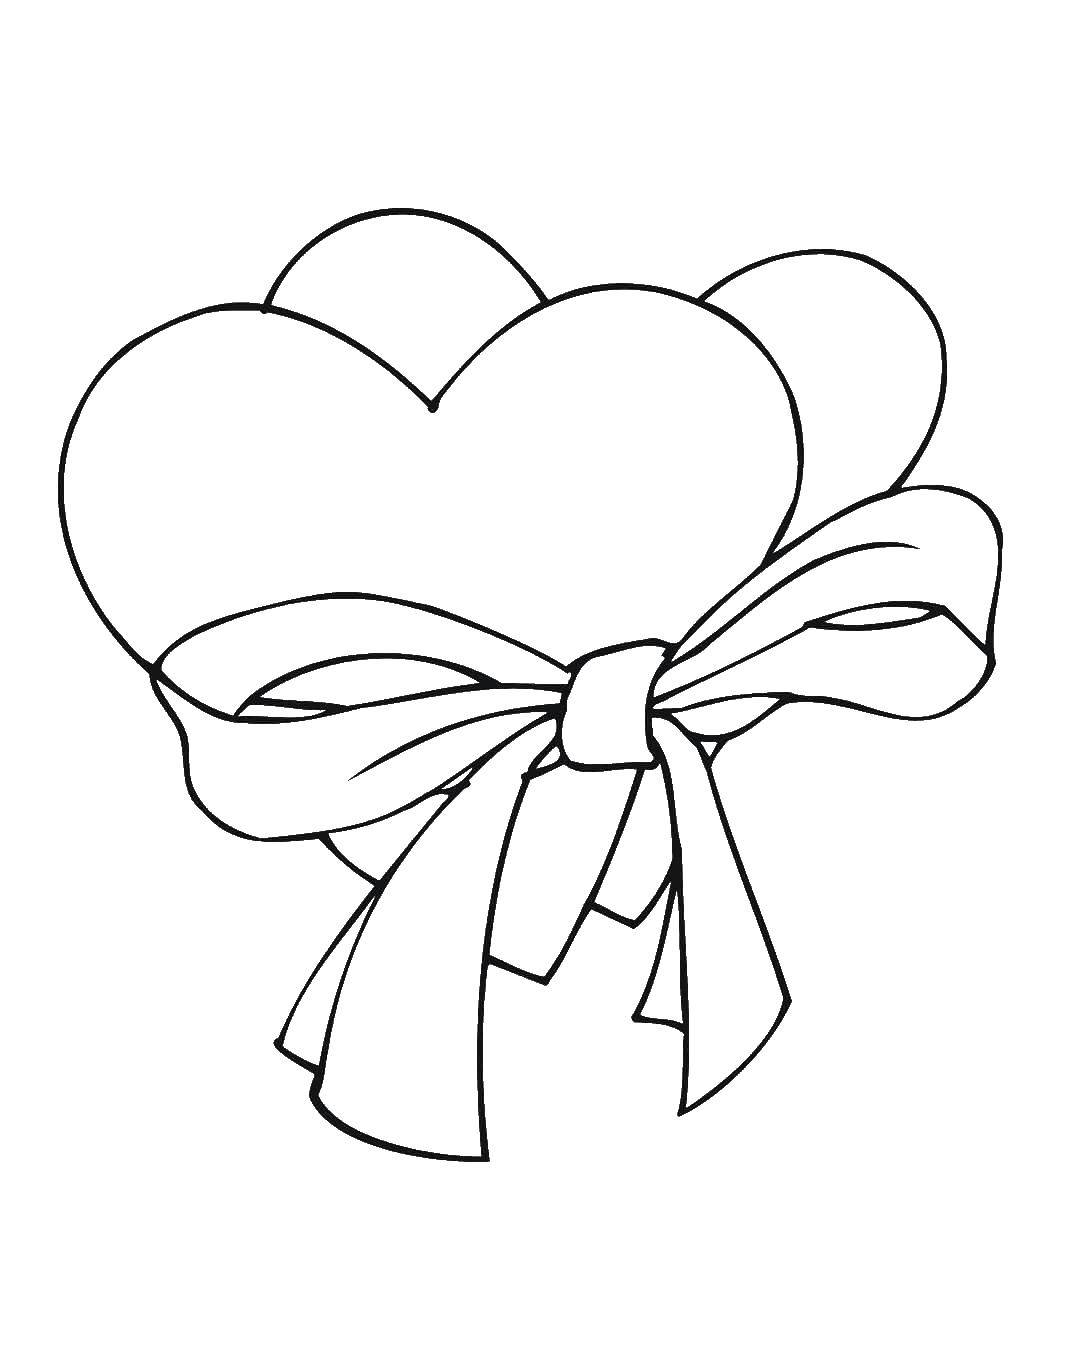 Coloring Hearts and bow. Category Hearts. Tags:  hearts, bow, love.